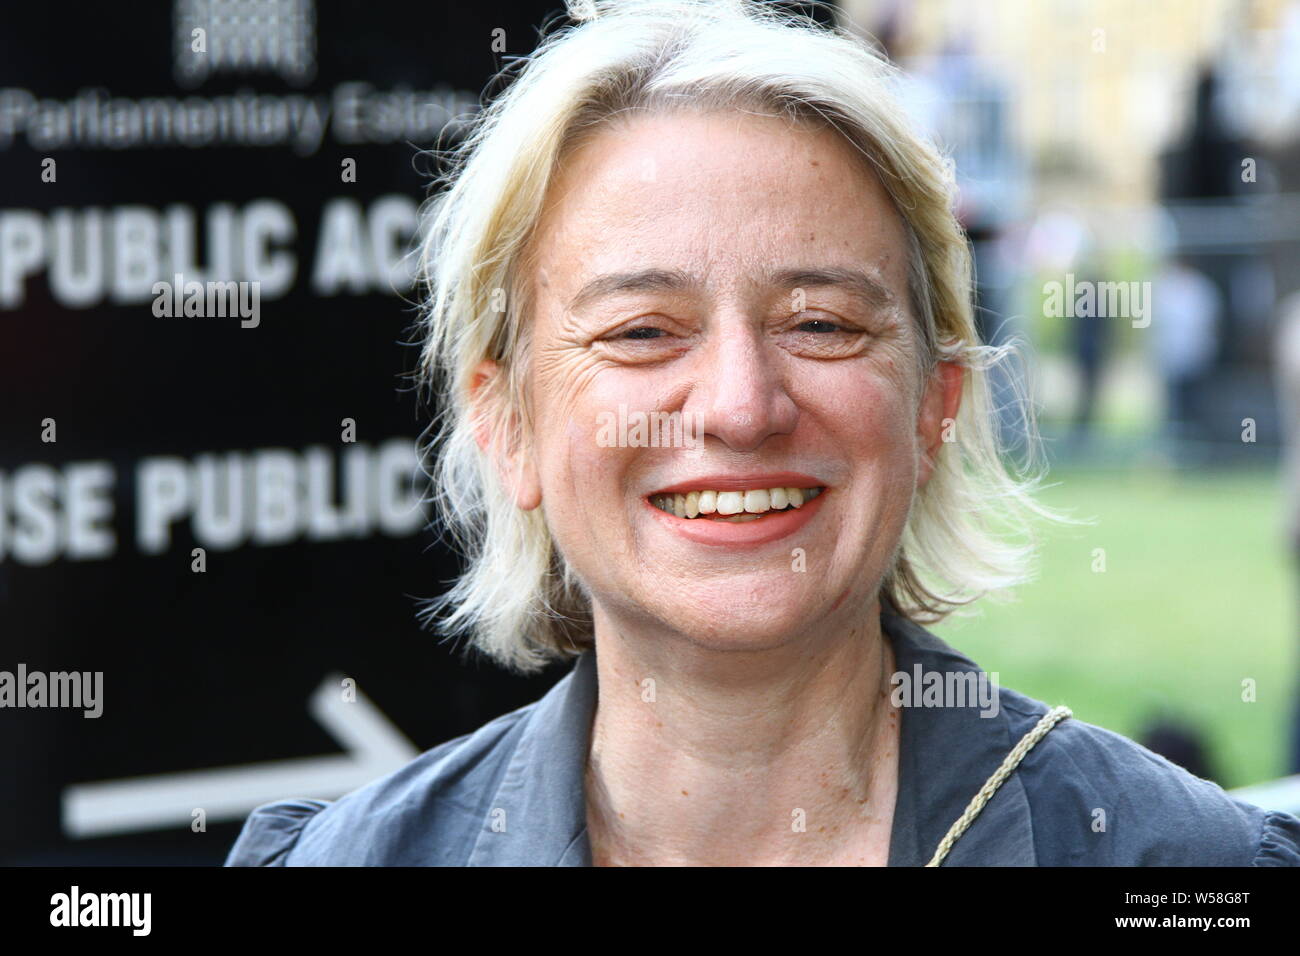 NATALIE BENNETT FORMER LEADER OF THE GREEN PARTY PICTURED AT COLLEGE GREEN IN THE CITY OF WESTMINSTER ON 24TH JULY 2019. BRITISH POLITICIANS. UK POLITICS. GREEN PARTY. LEADER OF THE GREEN PARTY FOR 4 YEARS FROM 2012 TO 2016. JOURNALISTS. FAMOUS POLITICIANS. Stock Photo